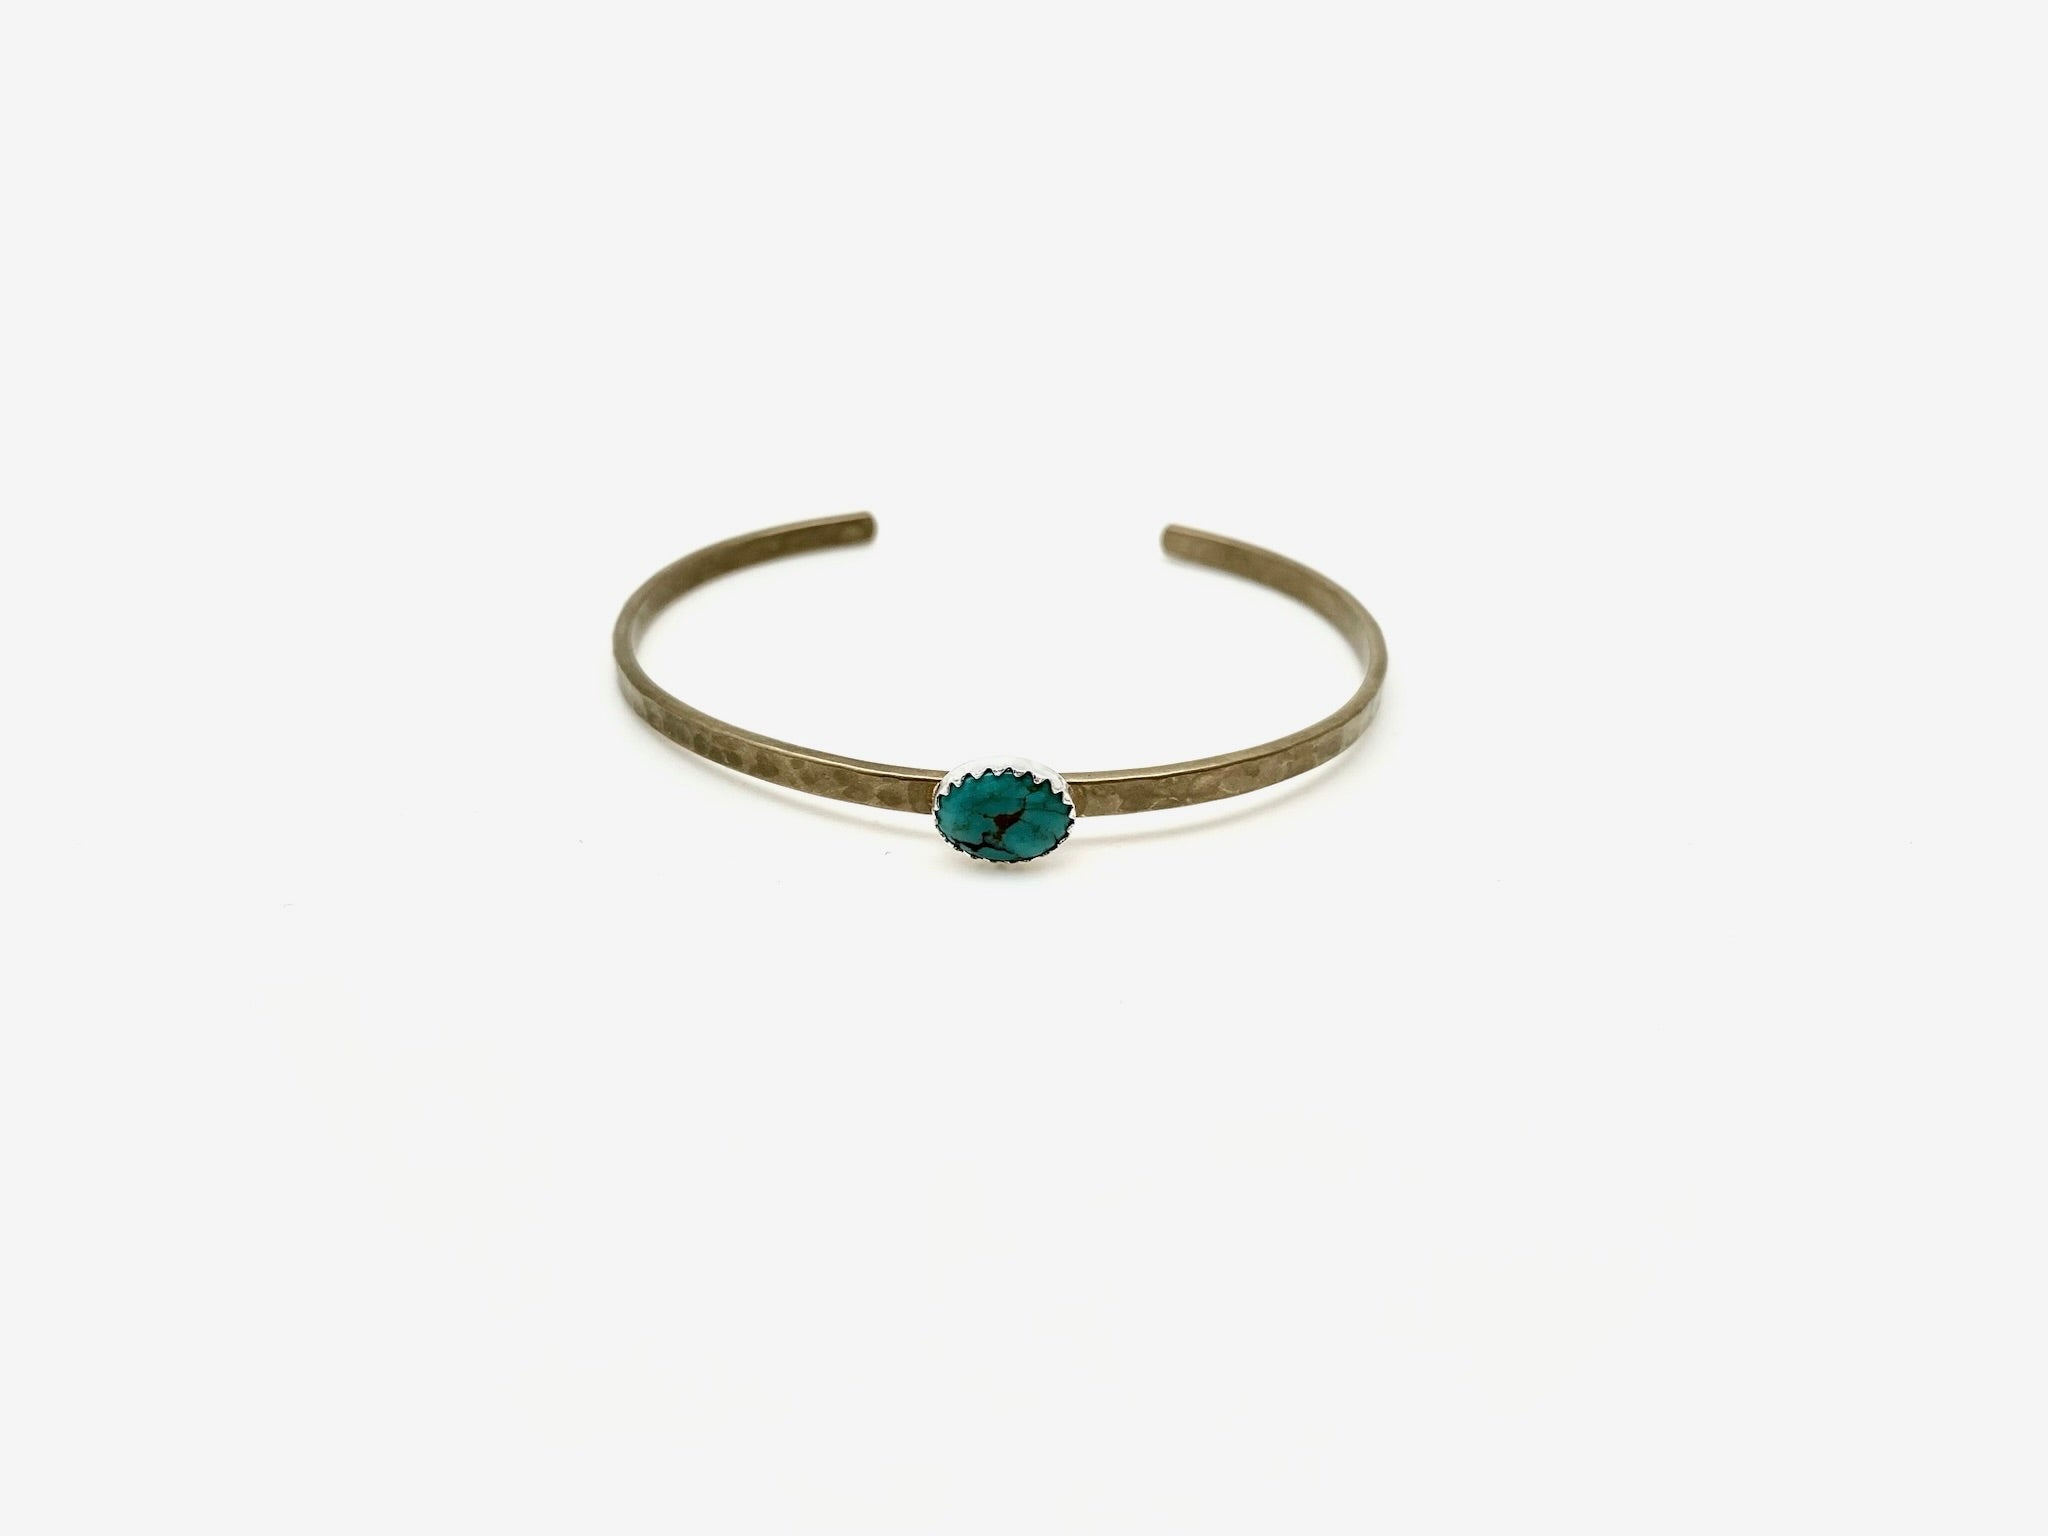 Turquoise Everyday Brass Cuff